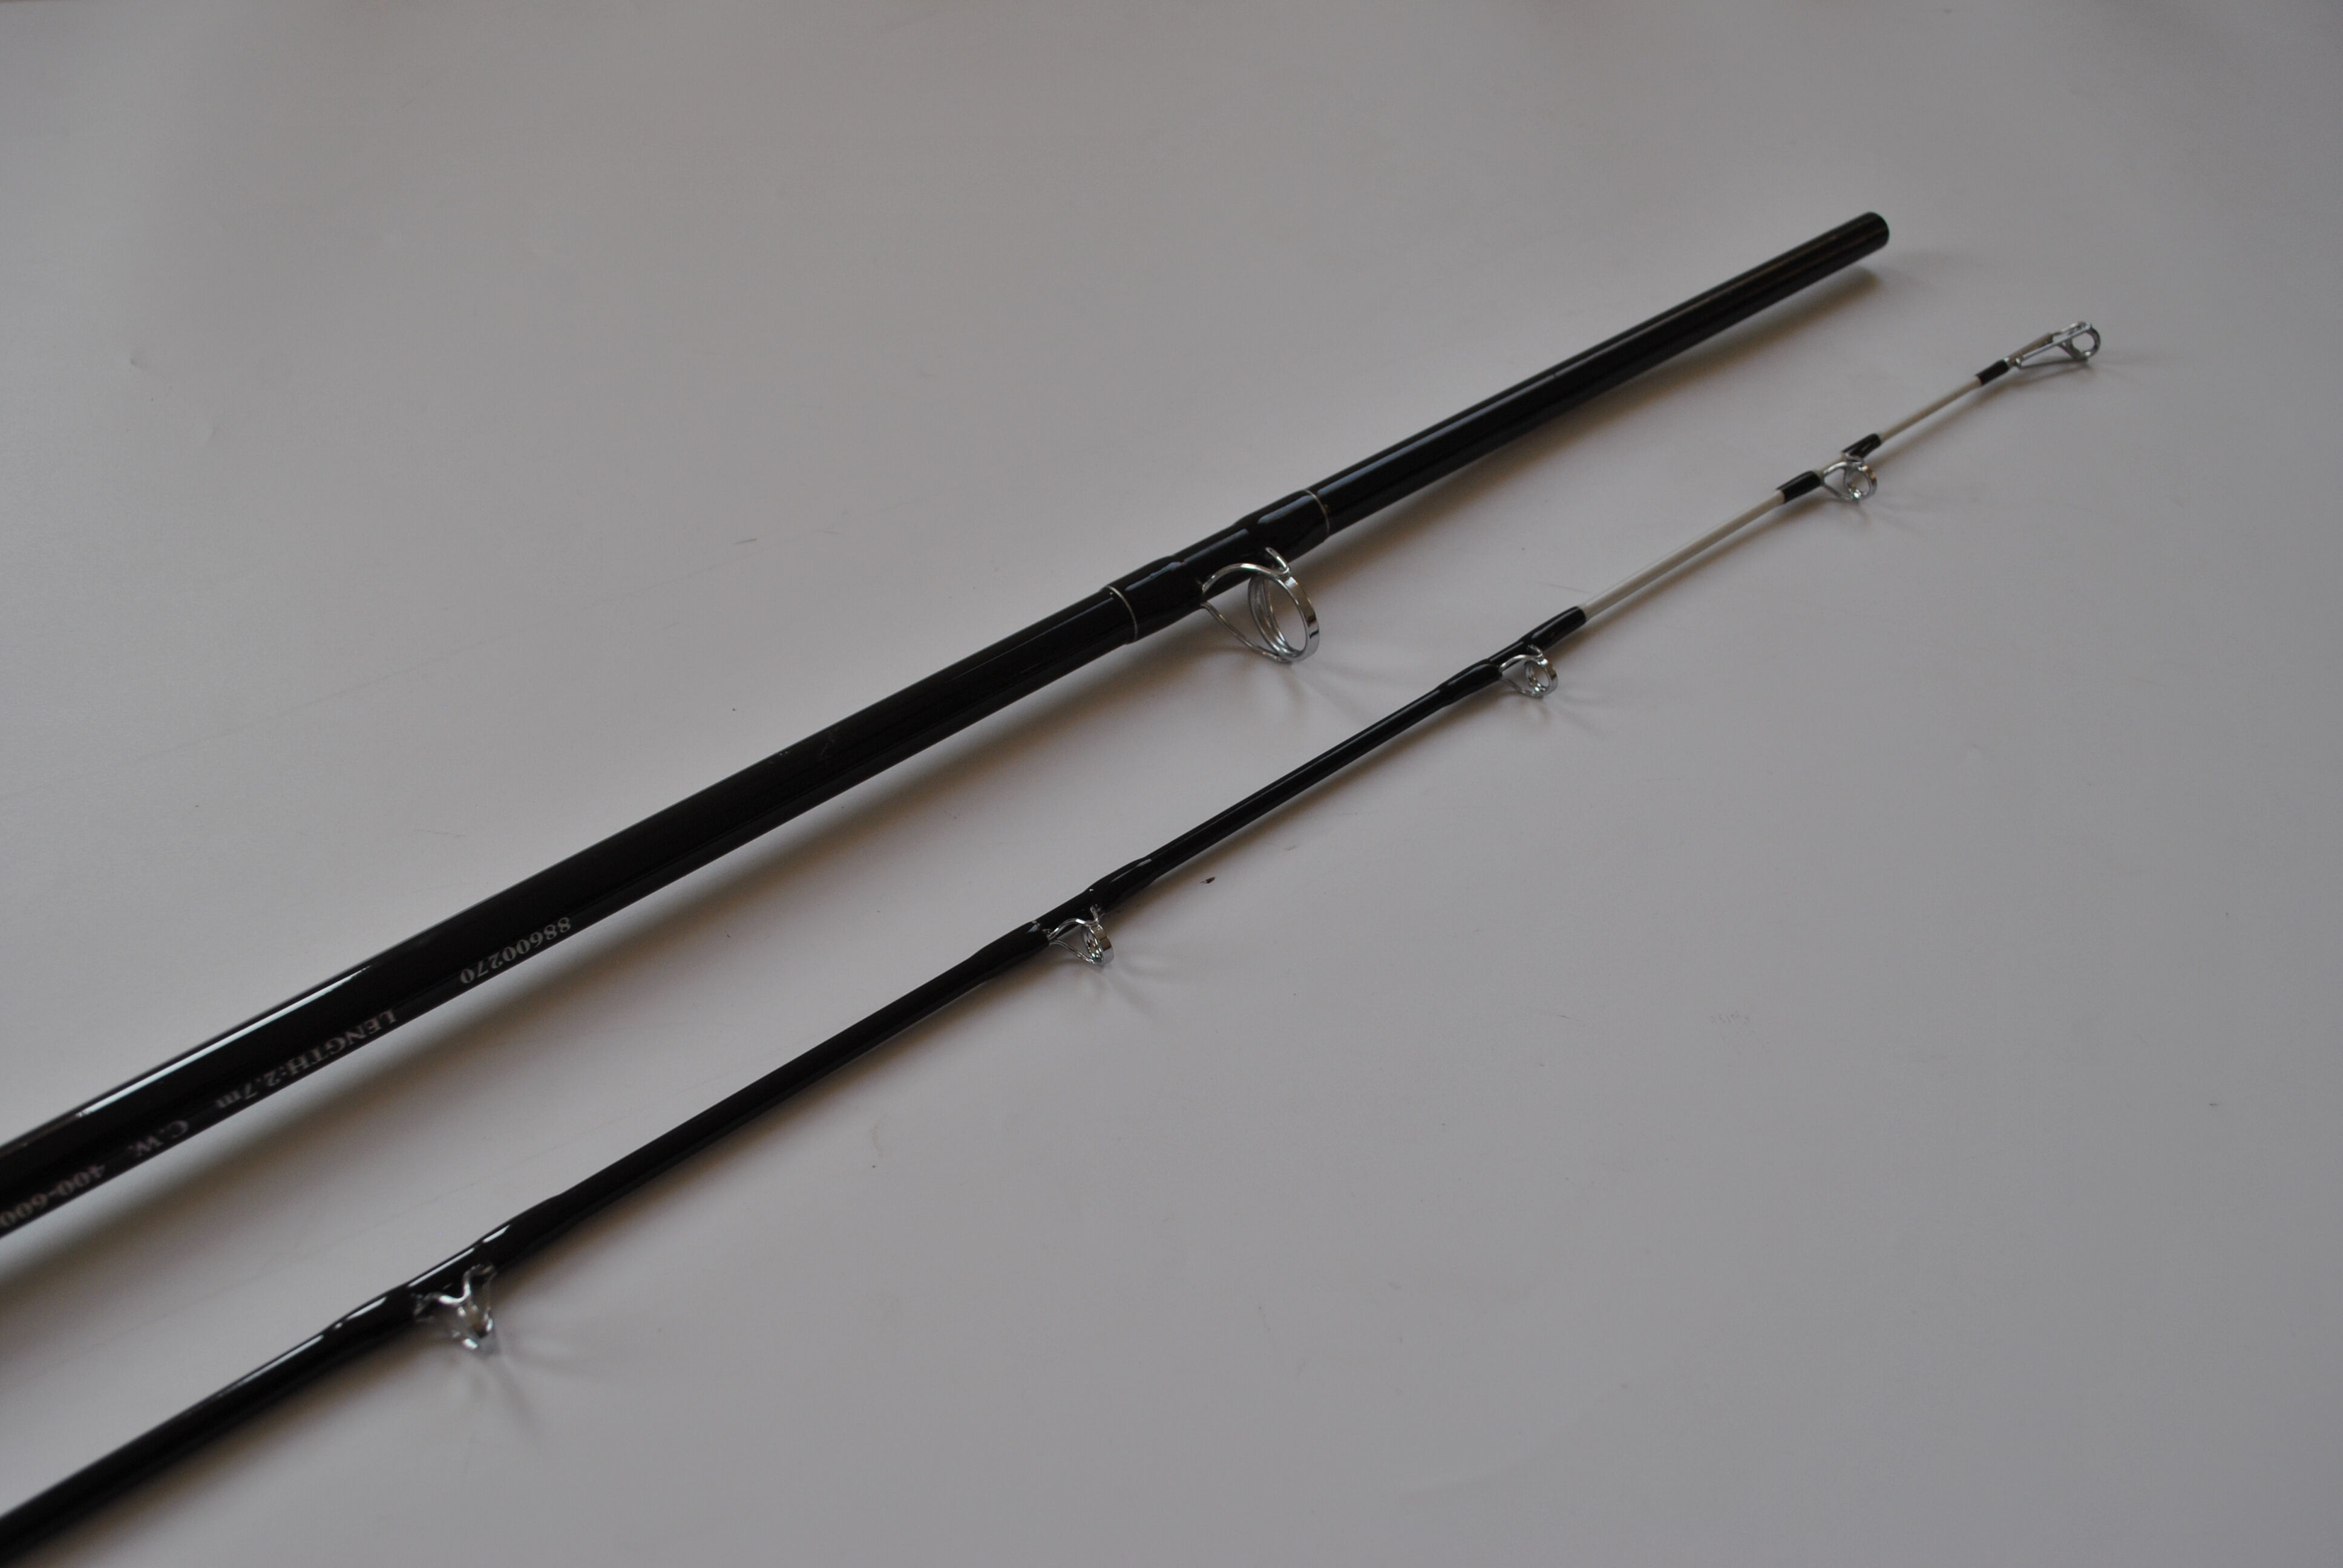 Spinning/Casting Fishing Rod 20-100g High Quality Telescopic Carbon Rod Big  Game Rod For Catfish